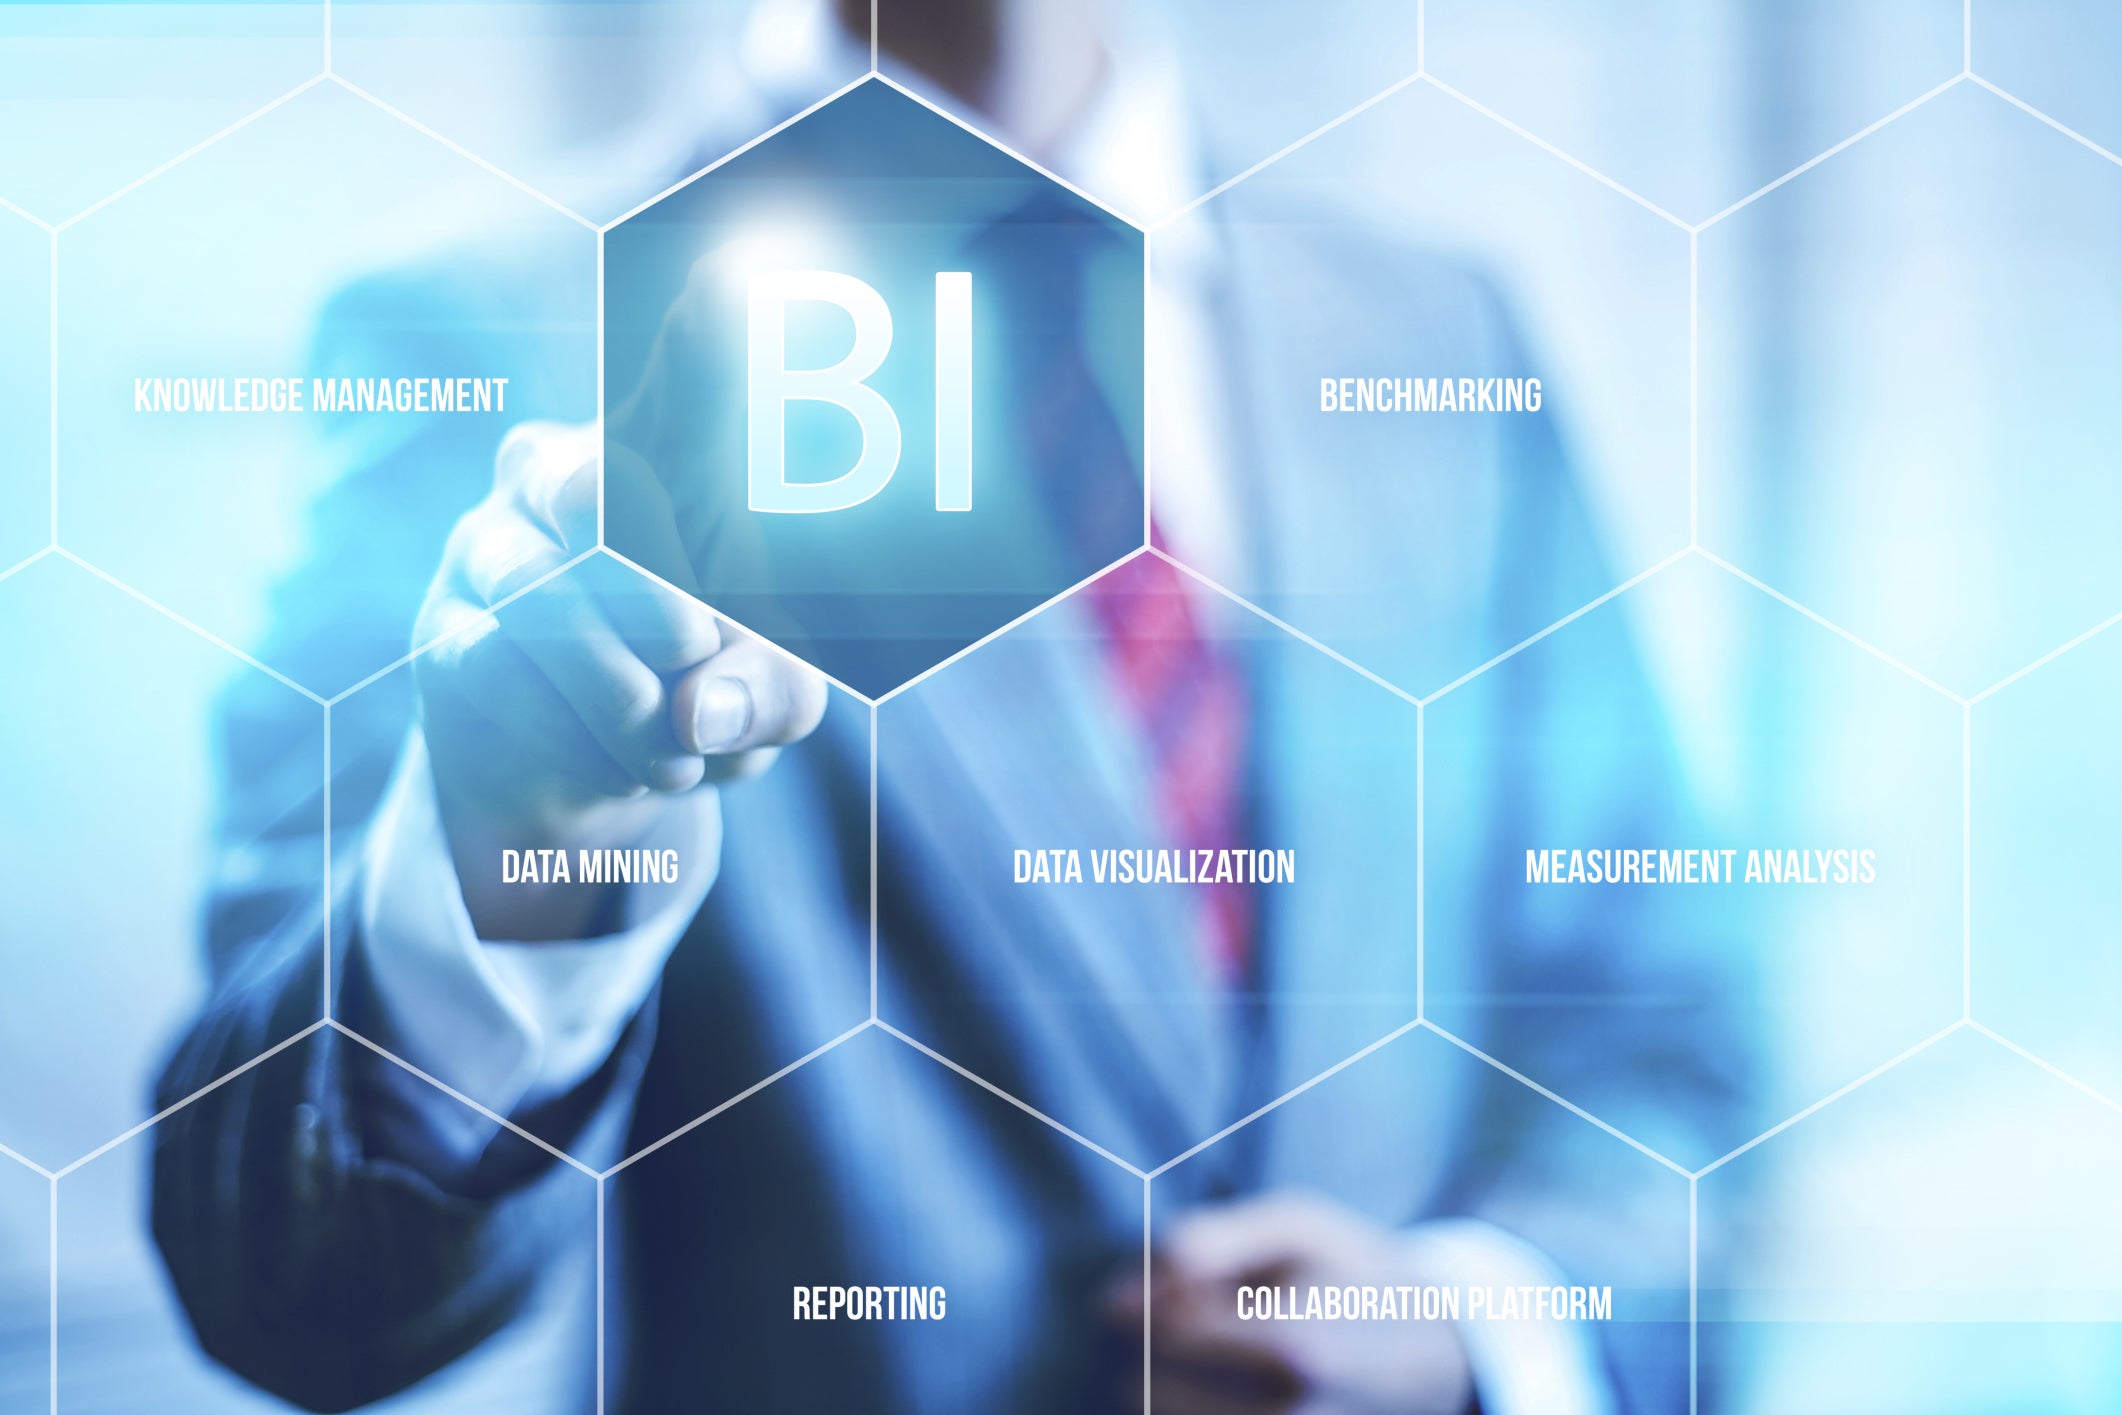 What challenges faced in implementing Business Intelligence in Saudi Arabia?